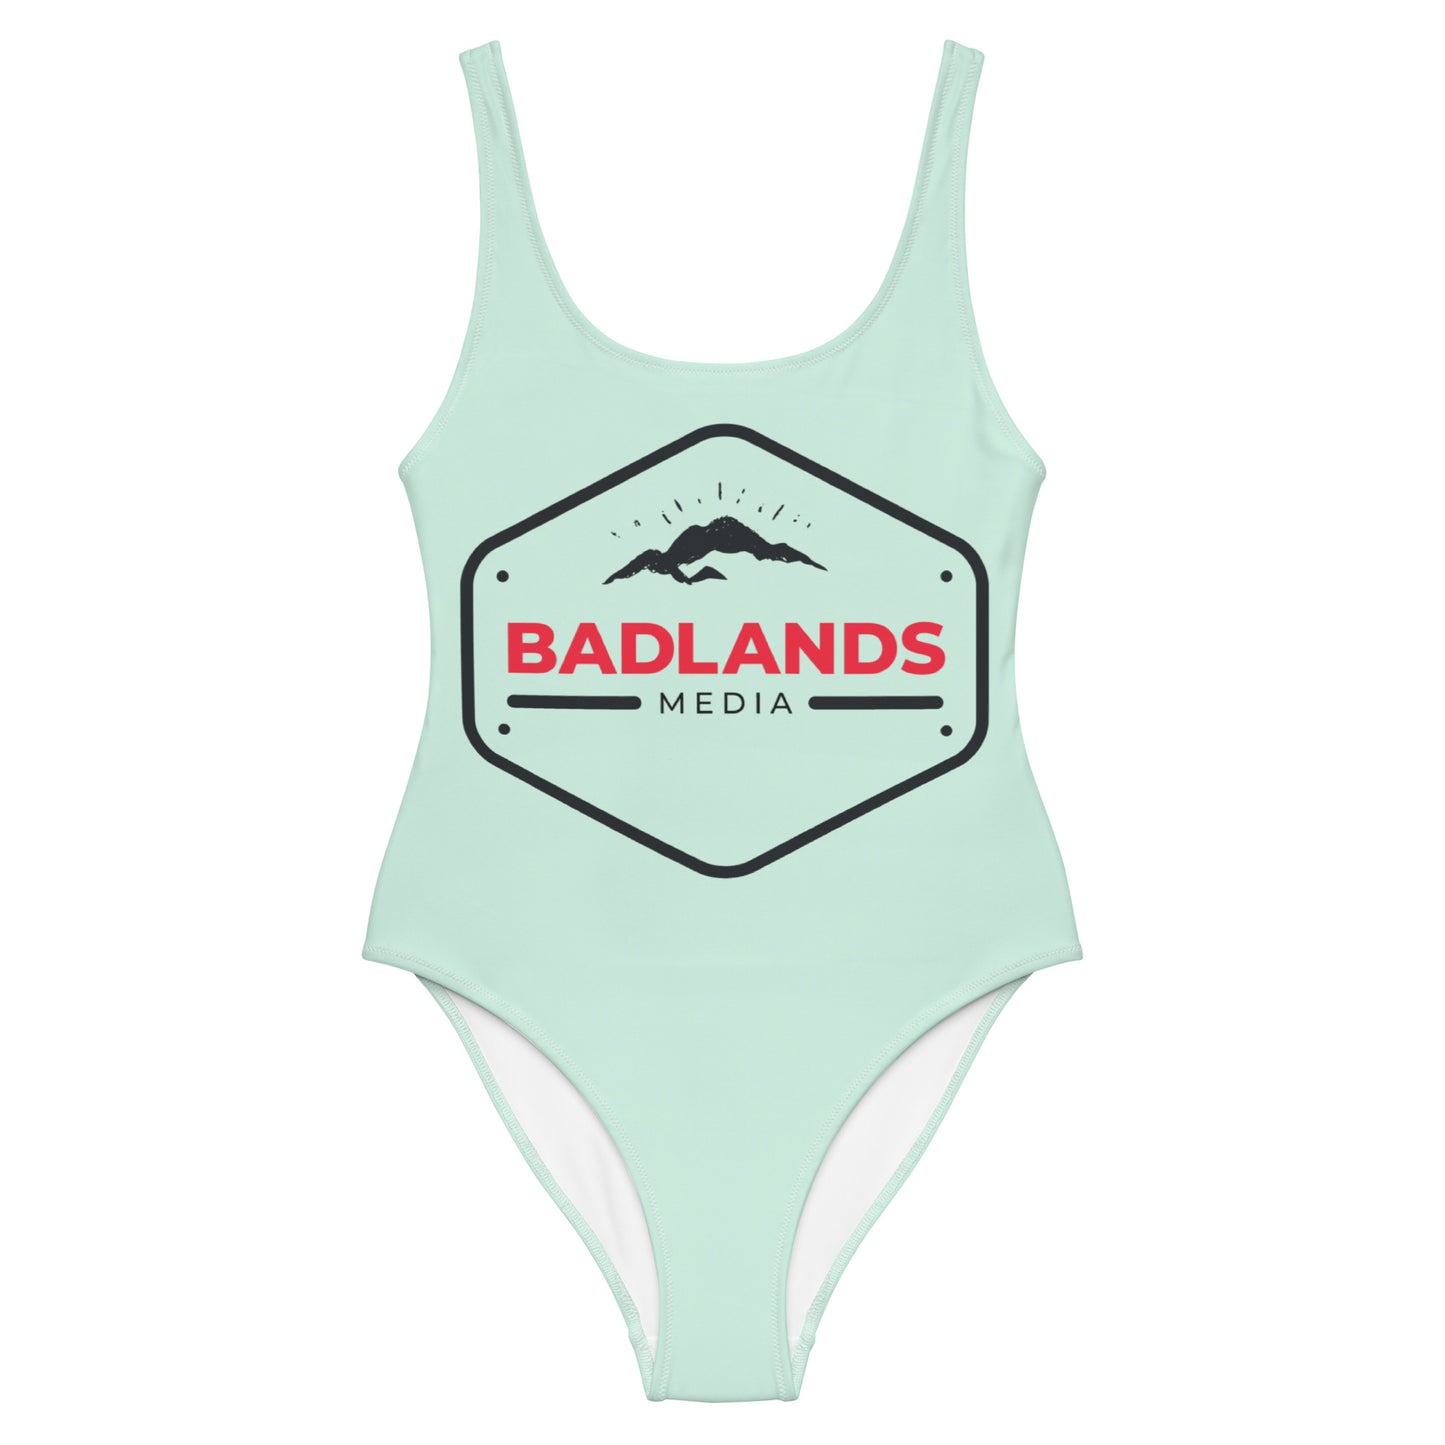 Badlands One-Piece Swimsuit in mint chip